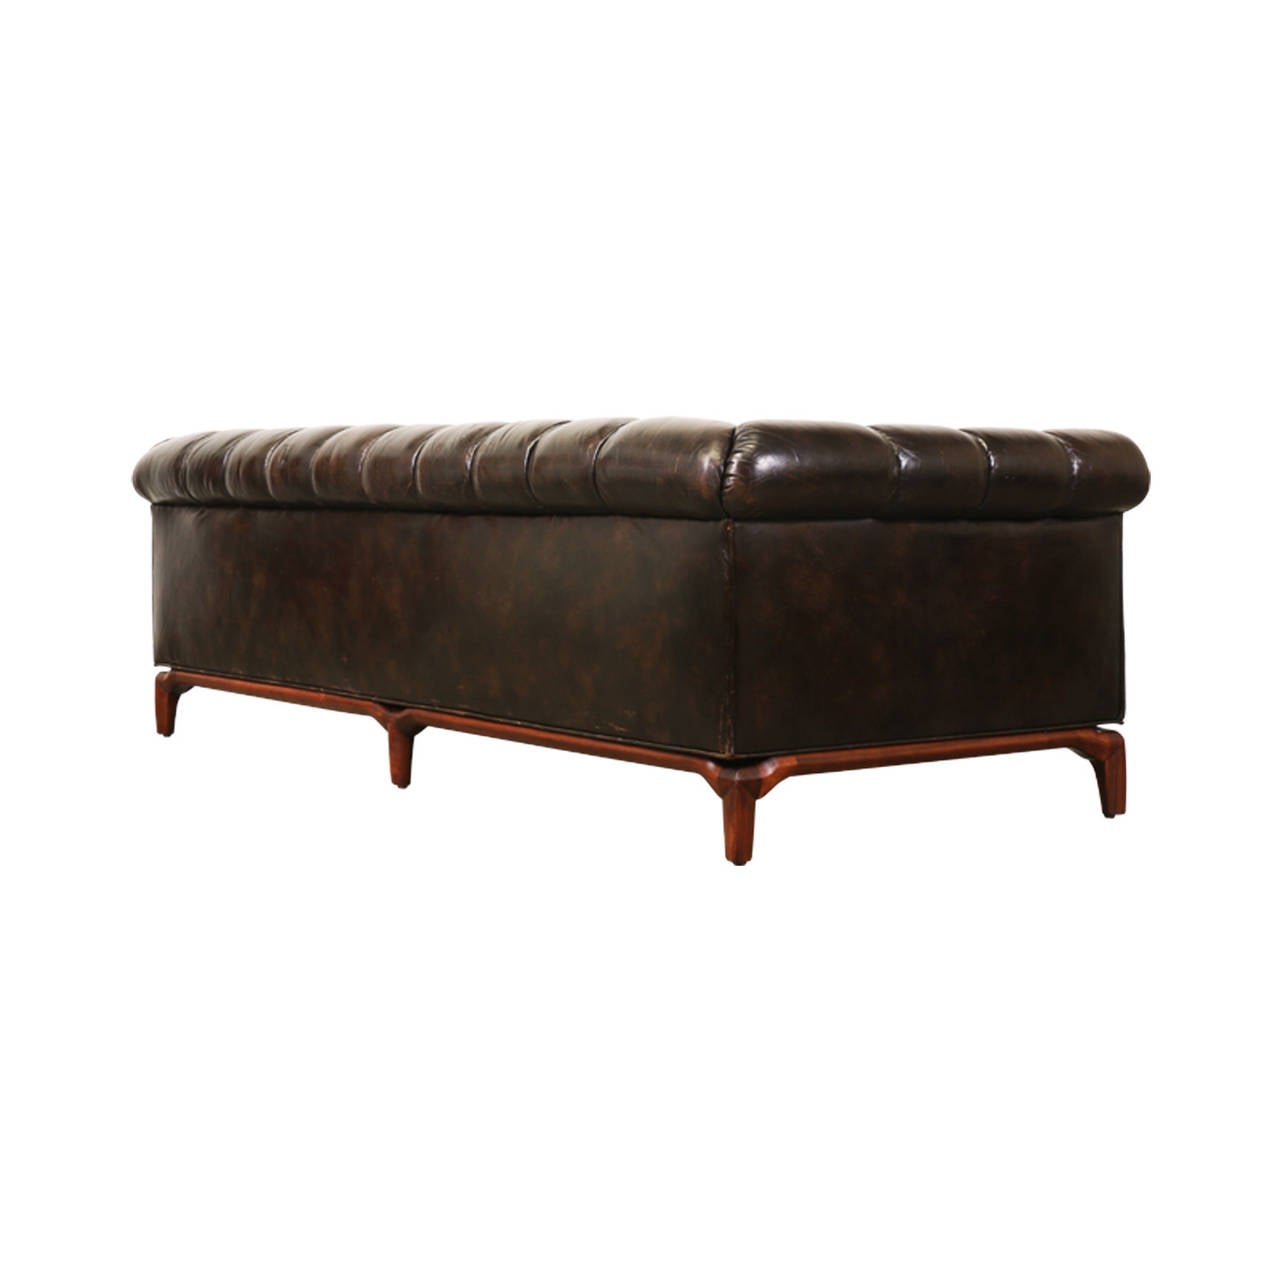 Mid-20th Century Maurice Bailey Biscuit Tufted Leather Sofa for Monteverdi-Young